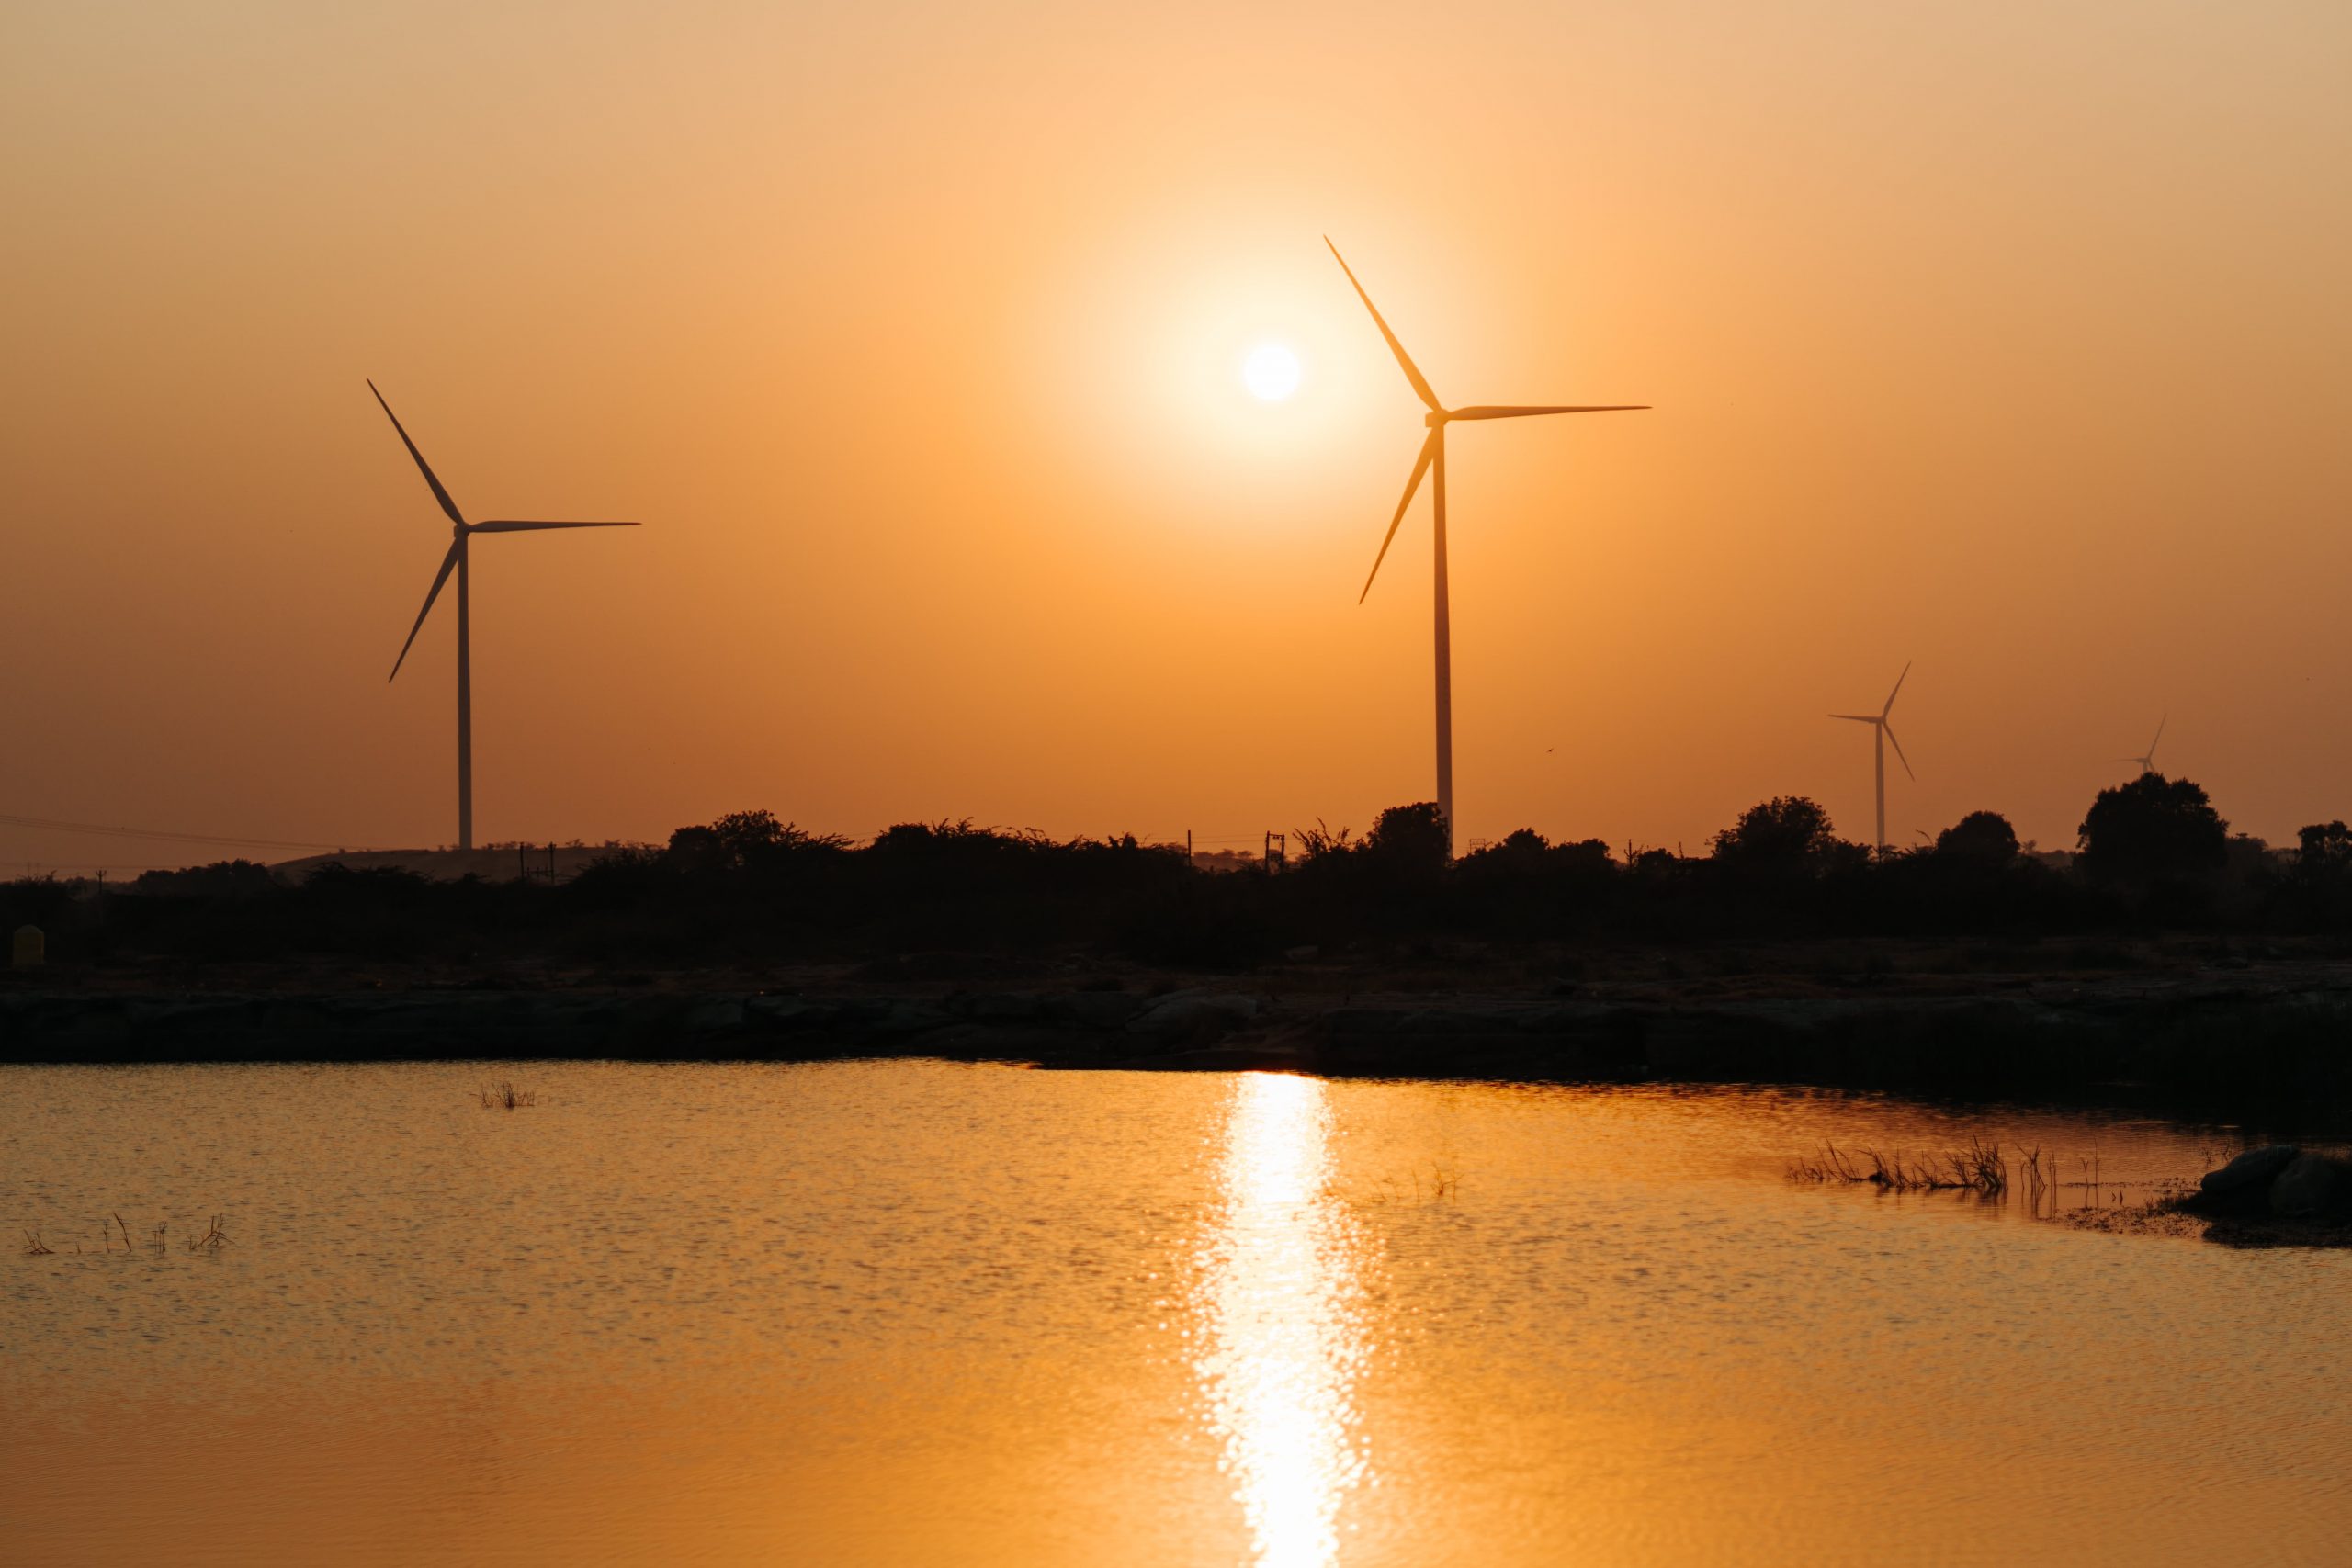 RWE, Tata Power to scope offshore wind projects in India